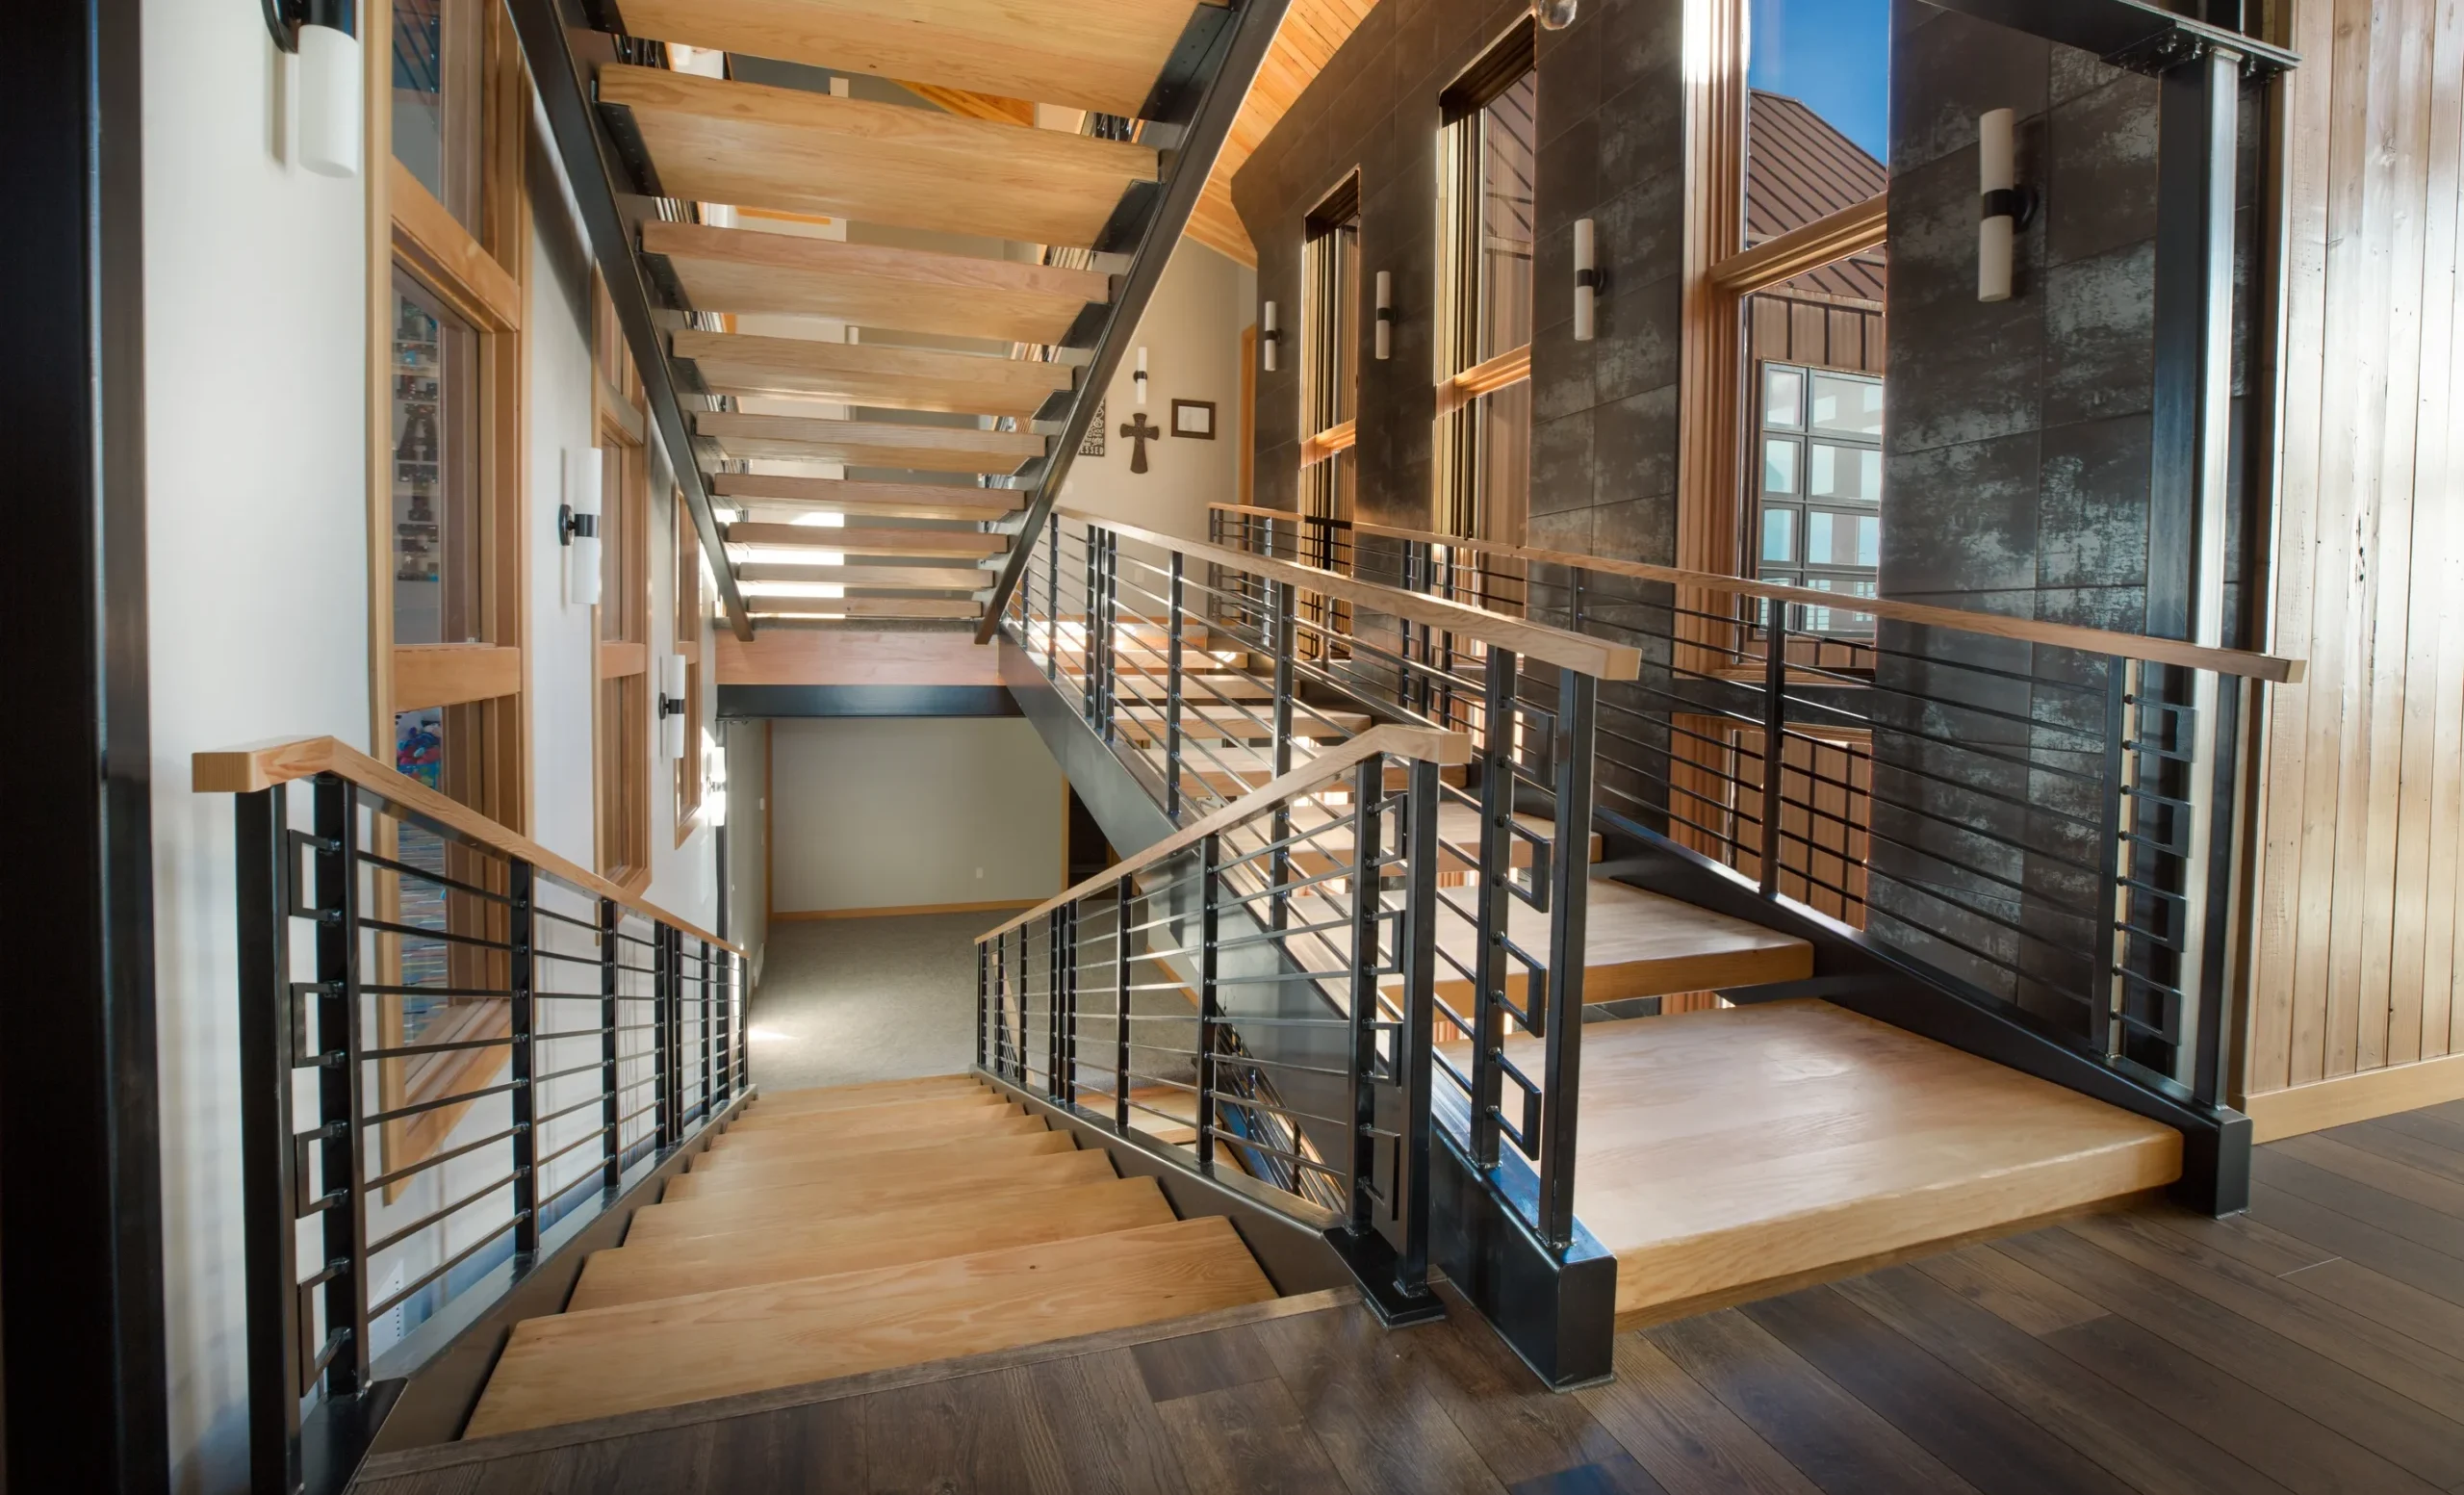 interior view of SIP home features modern, sculptural stair of wood treads and meal banisters; windows on both sides - photo